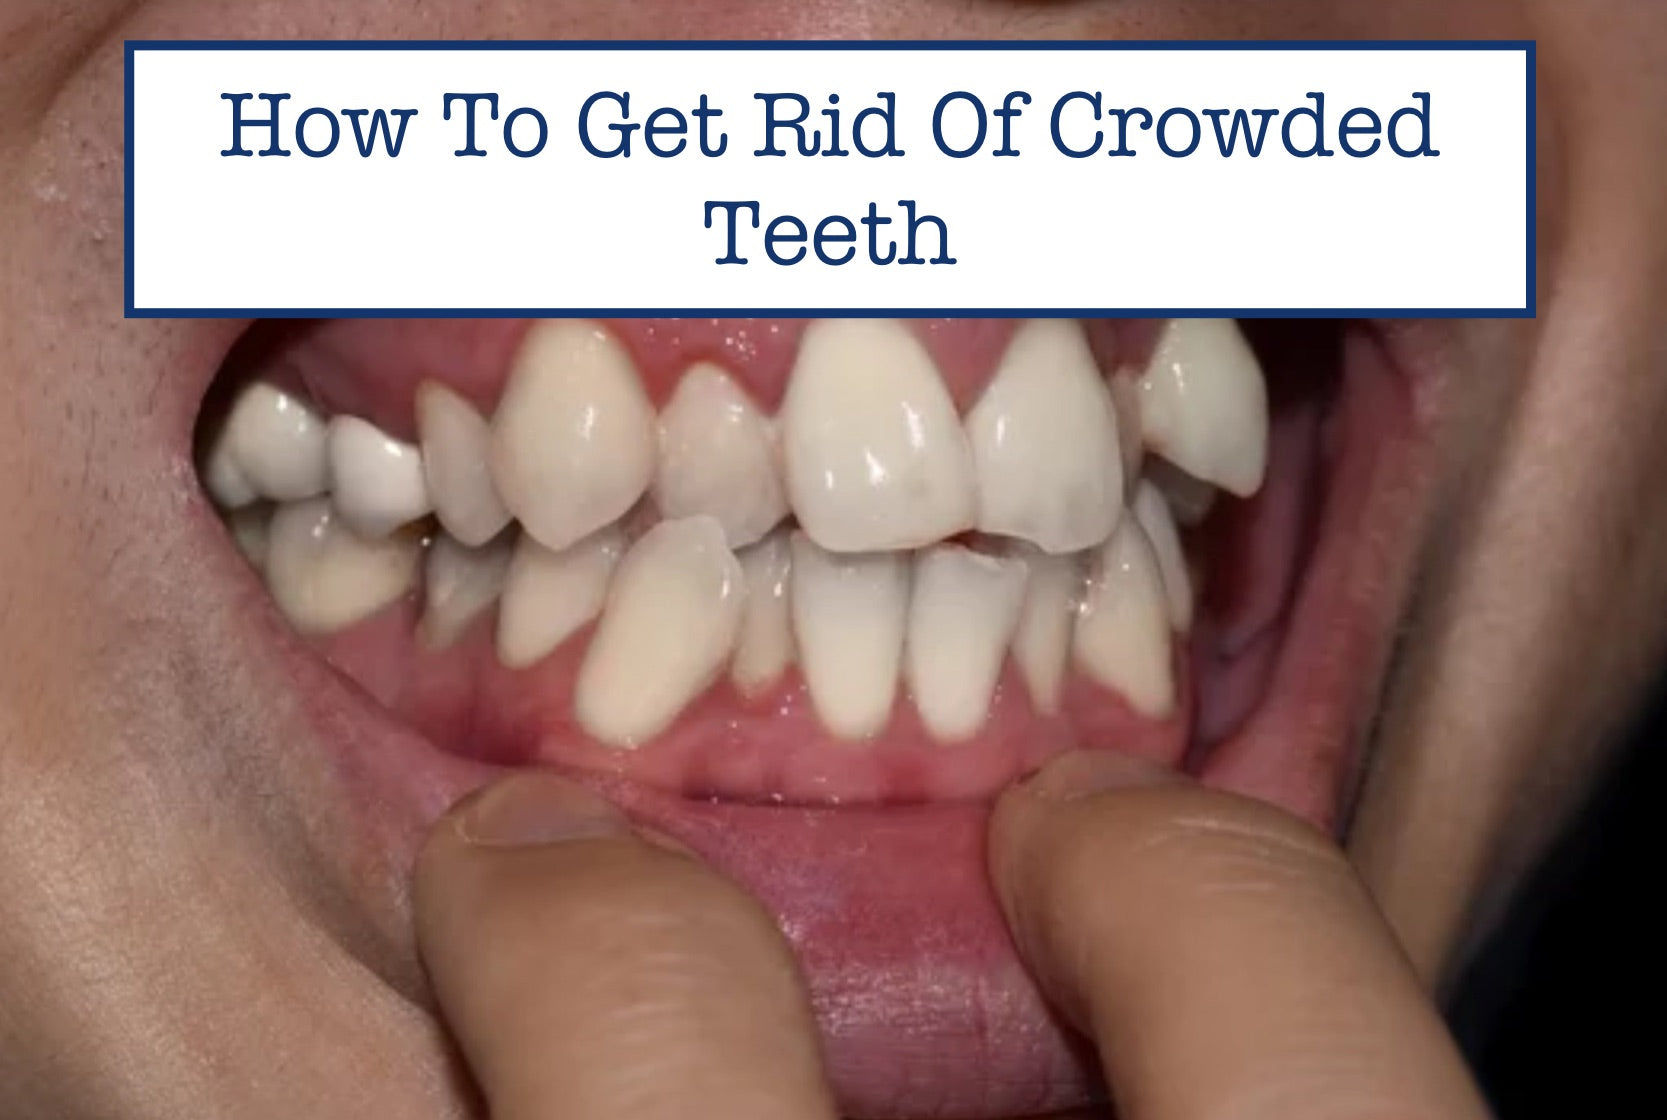 How To Get Rid Of Crowded Teeth